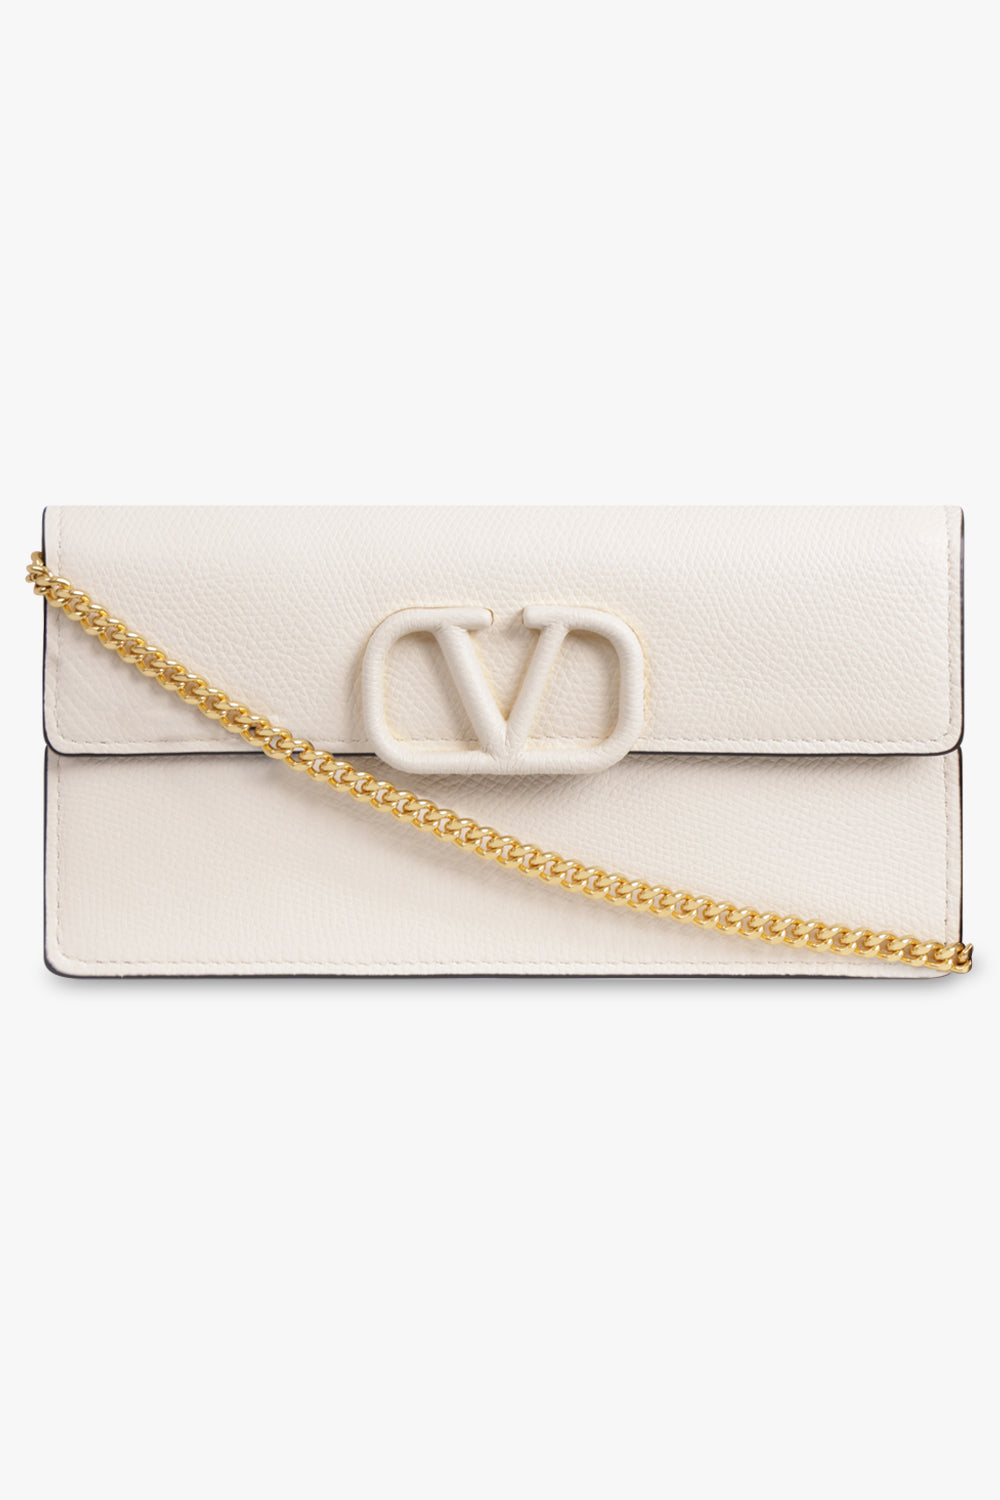 VALENTINO BAGS WHITE VRING SIGNATURE WALLET ON CHAIN LIGHT IVORY